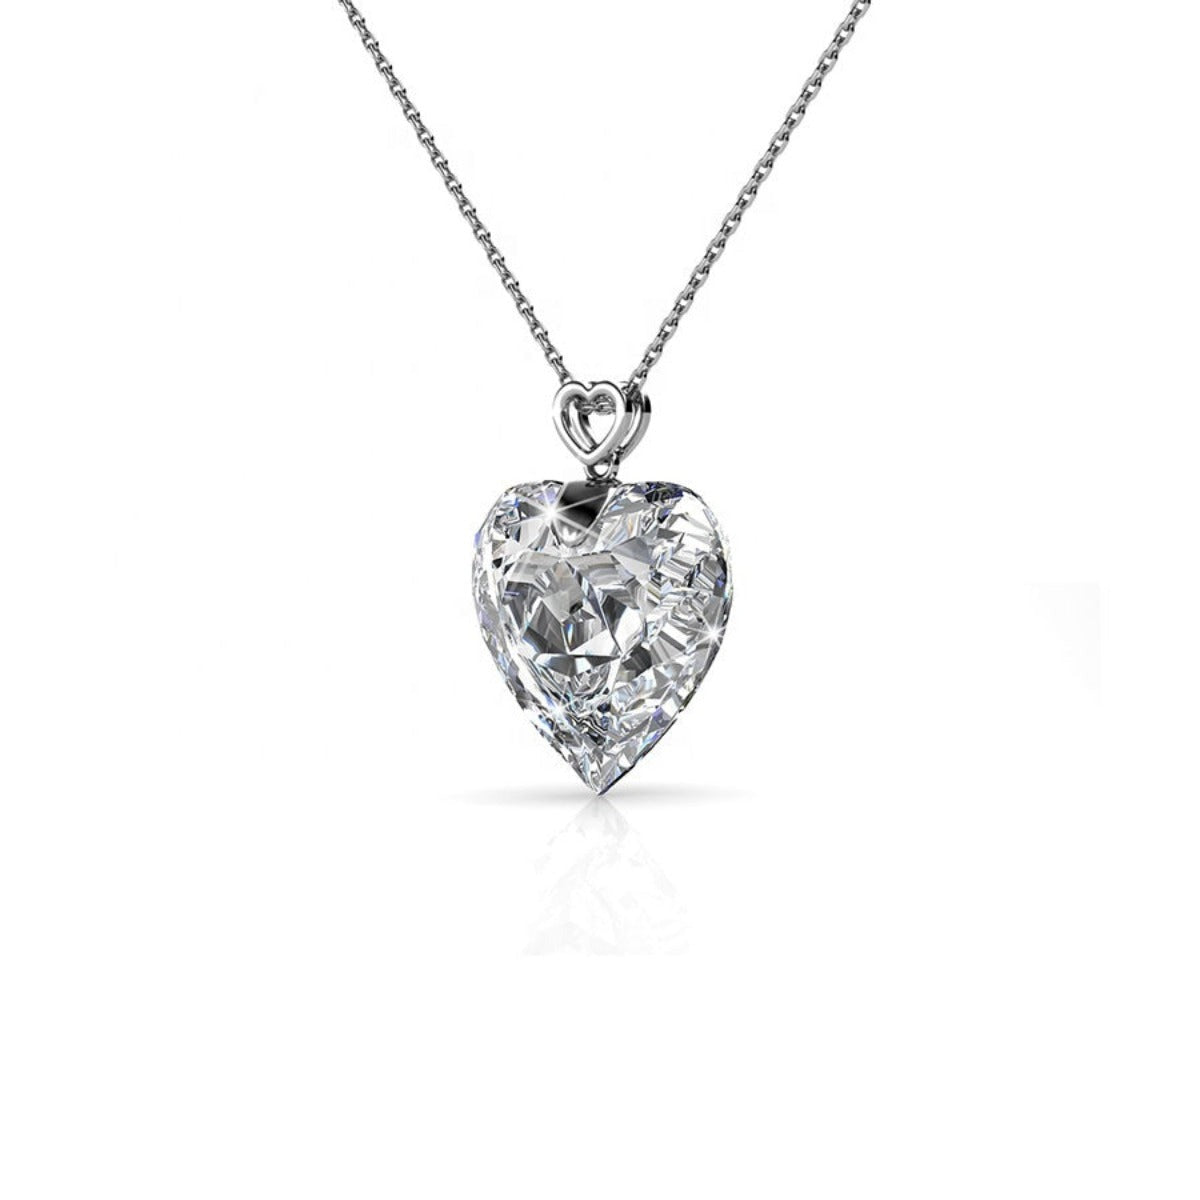 Cheery Love Heart Sterling Silver 925 Women Pendant Necklace 